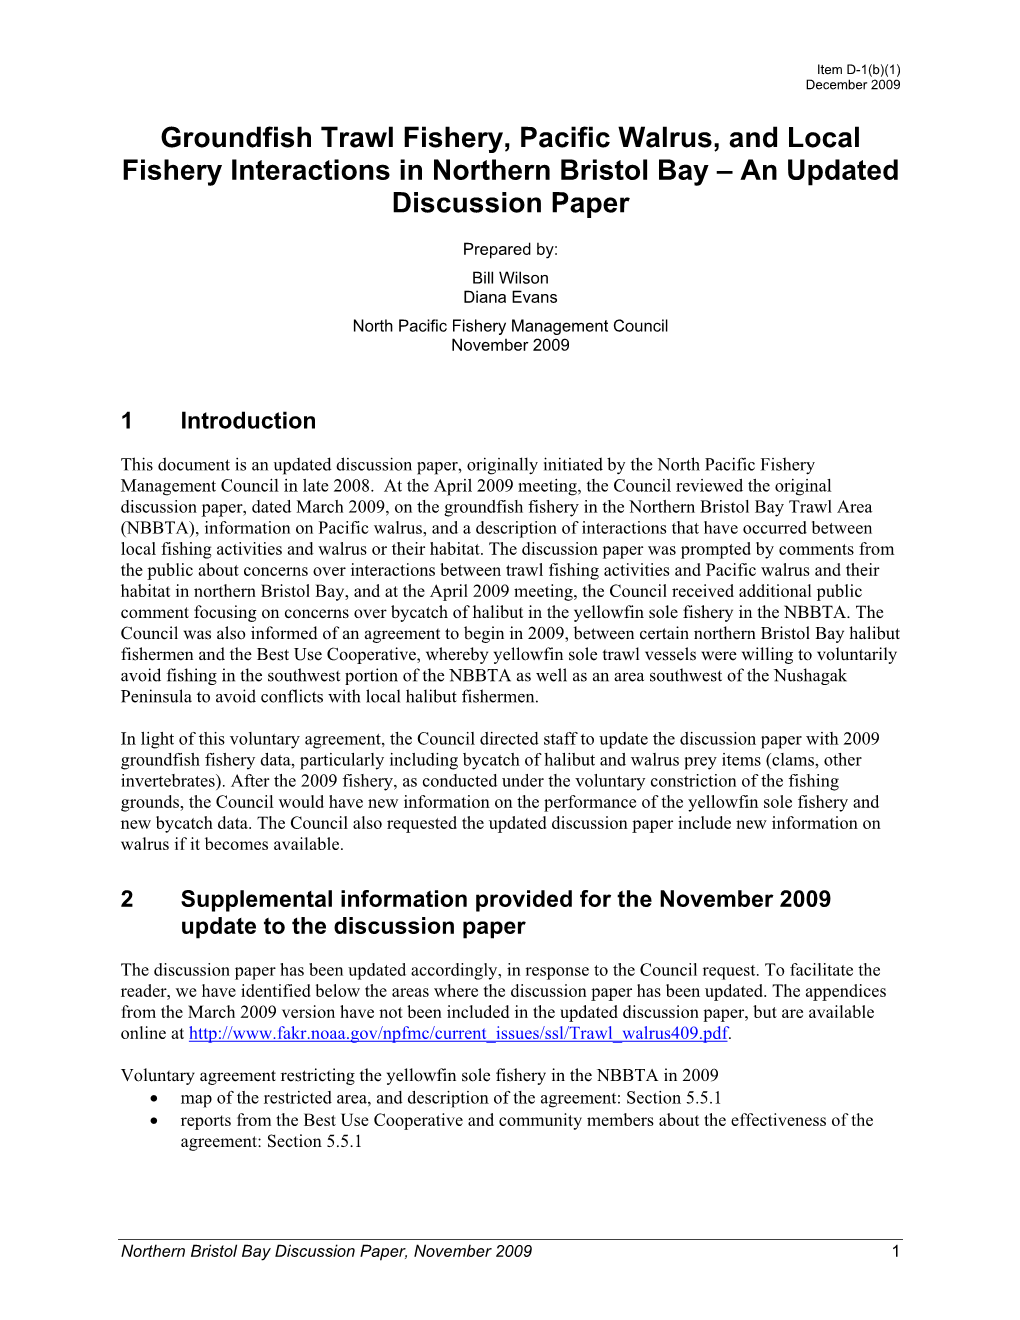 Groundfish Trawl Fishery, Pacific Walrus, and Local Fishery Interactions in Northern Bristol Bay – an Updated Discussion Paper